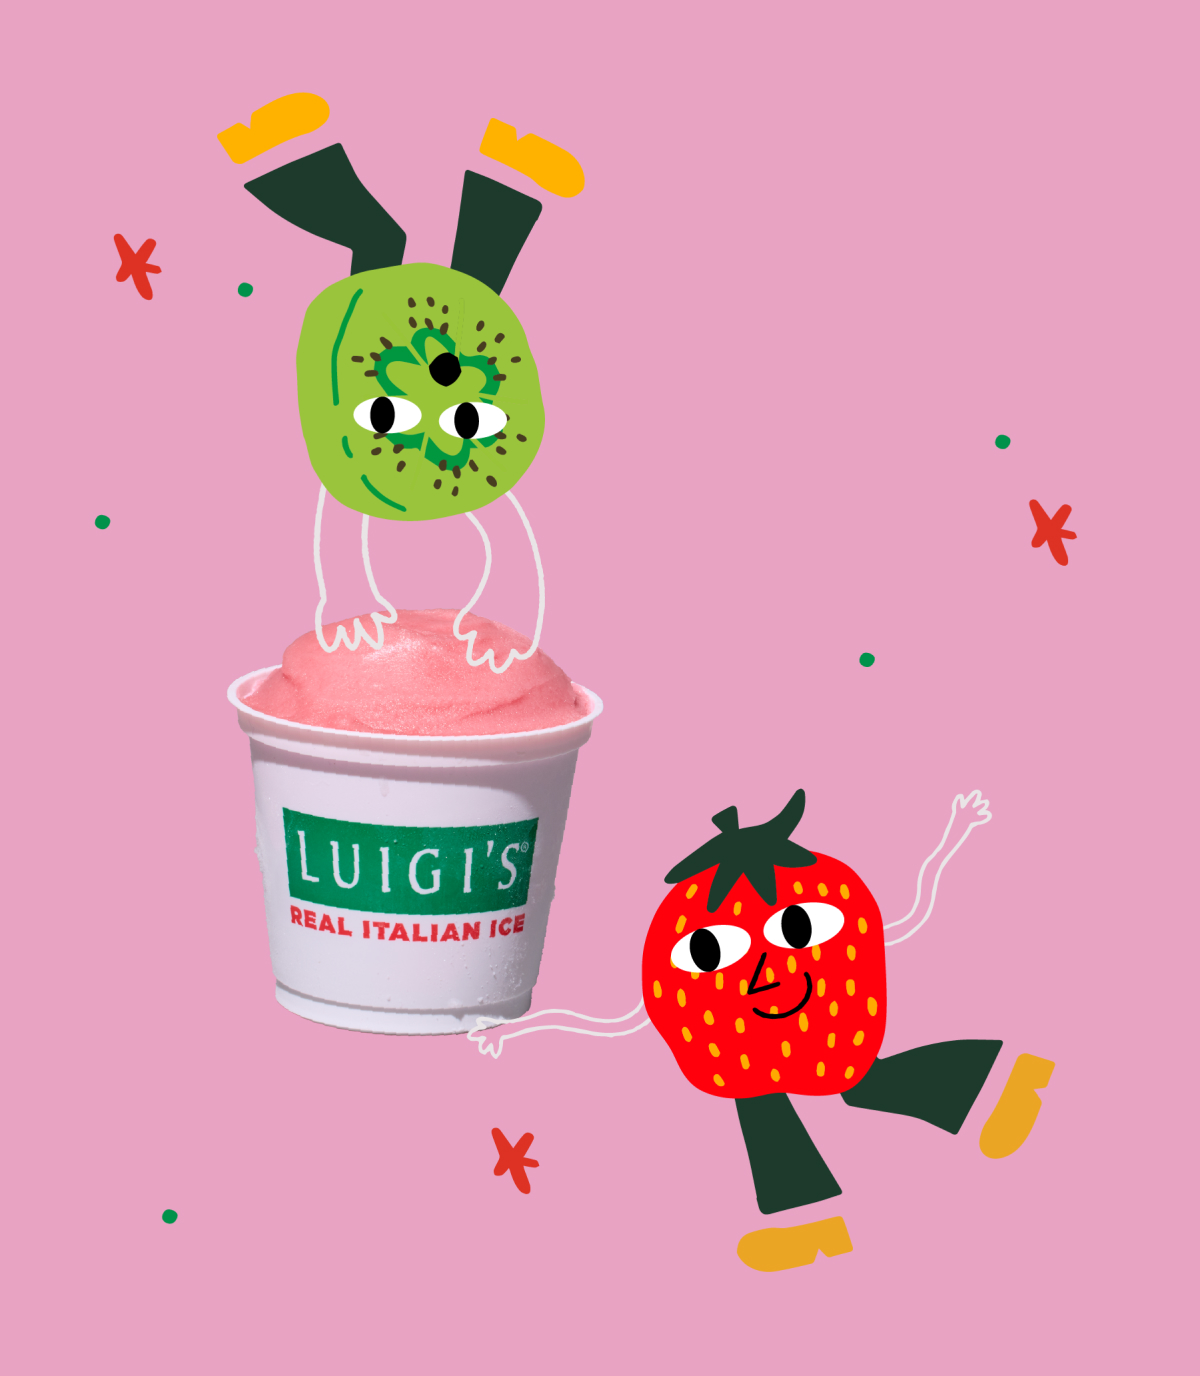 Cute kiwi and strawberry graphic characters with a cup of kiwi strawberry LUIGI'S real Italian Ice. Kiwi character is doing a handstand on the Italian ice. Background is pink with colorful star graphics.